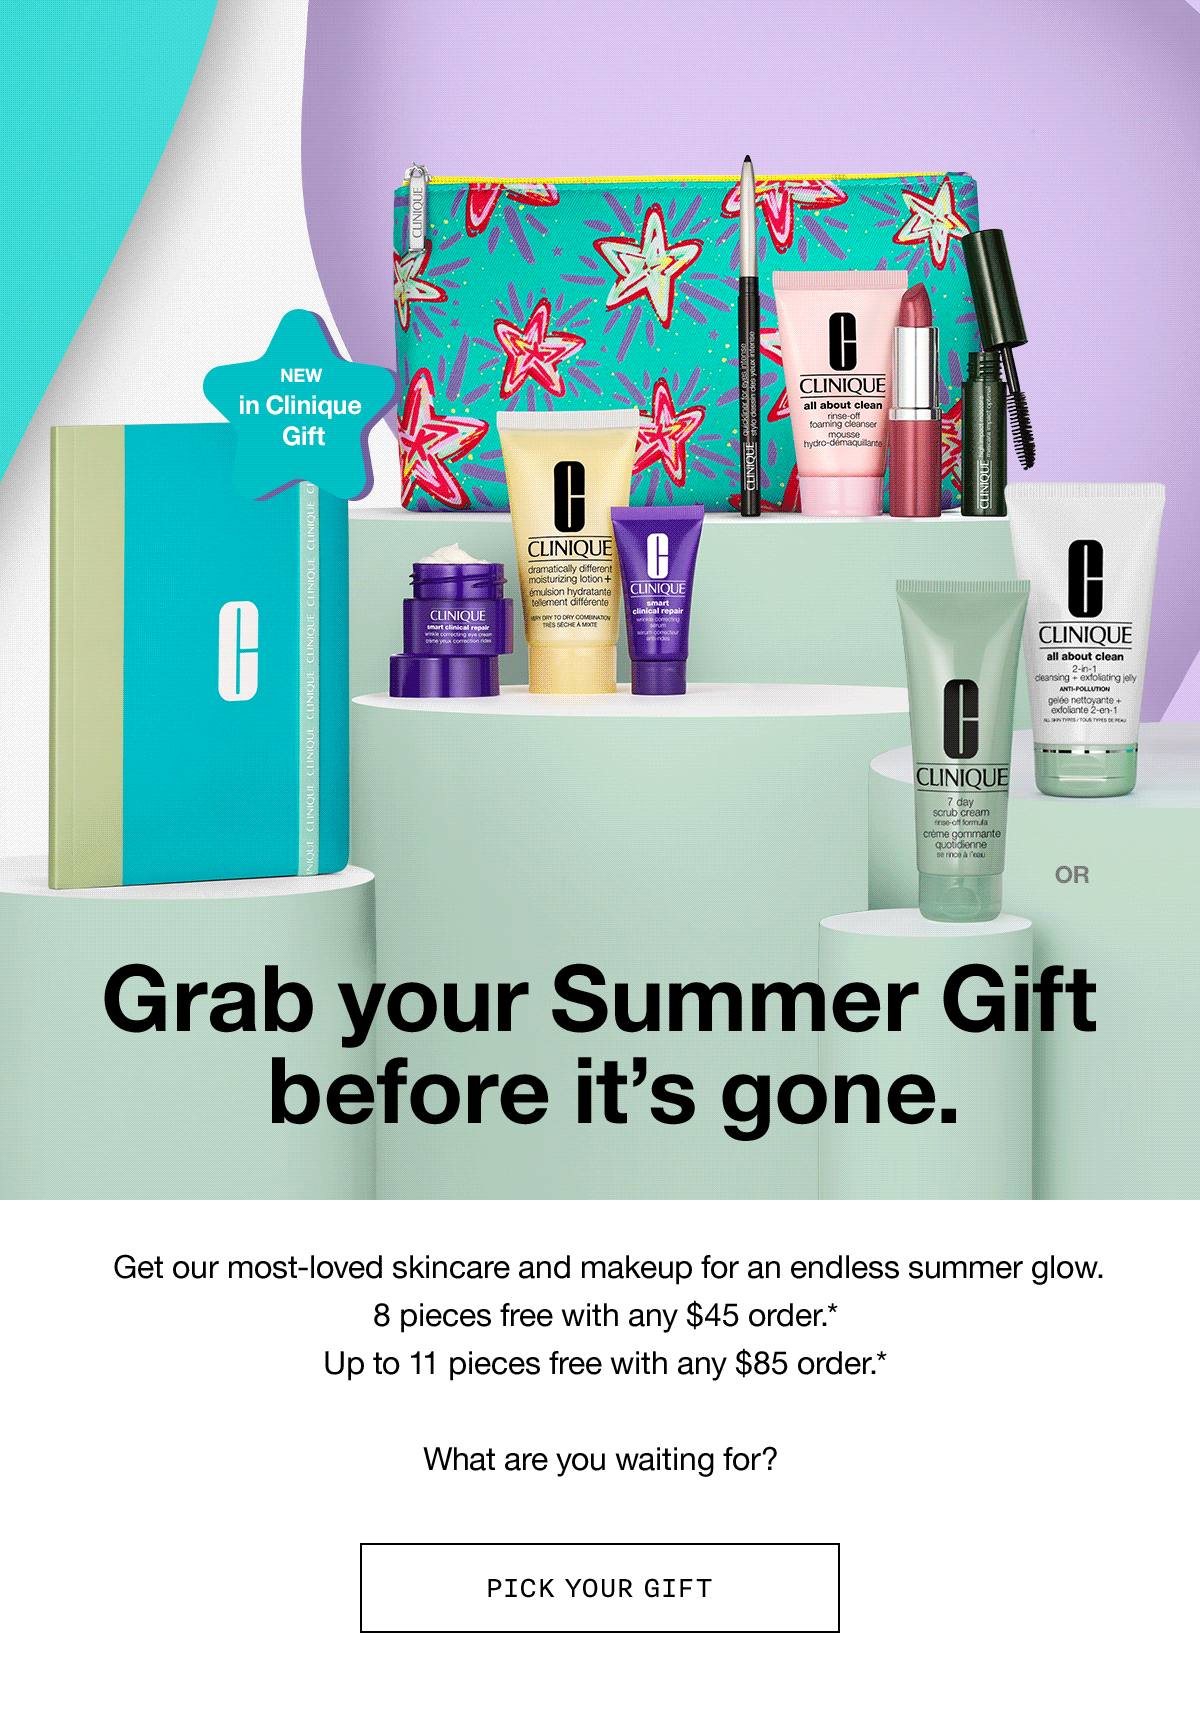 Grab your Summer Gift before it's gone. Get our most-loved skincare and makeup for an endless summer glow. 8 pieces free with any $45 order.* Up to 11 pieces free with any $85 order.* What are you waiting for? PICK YOUR GIFT